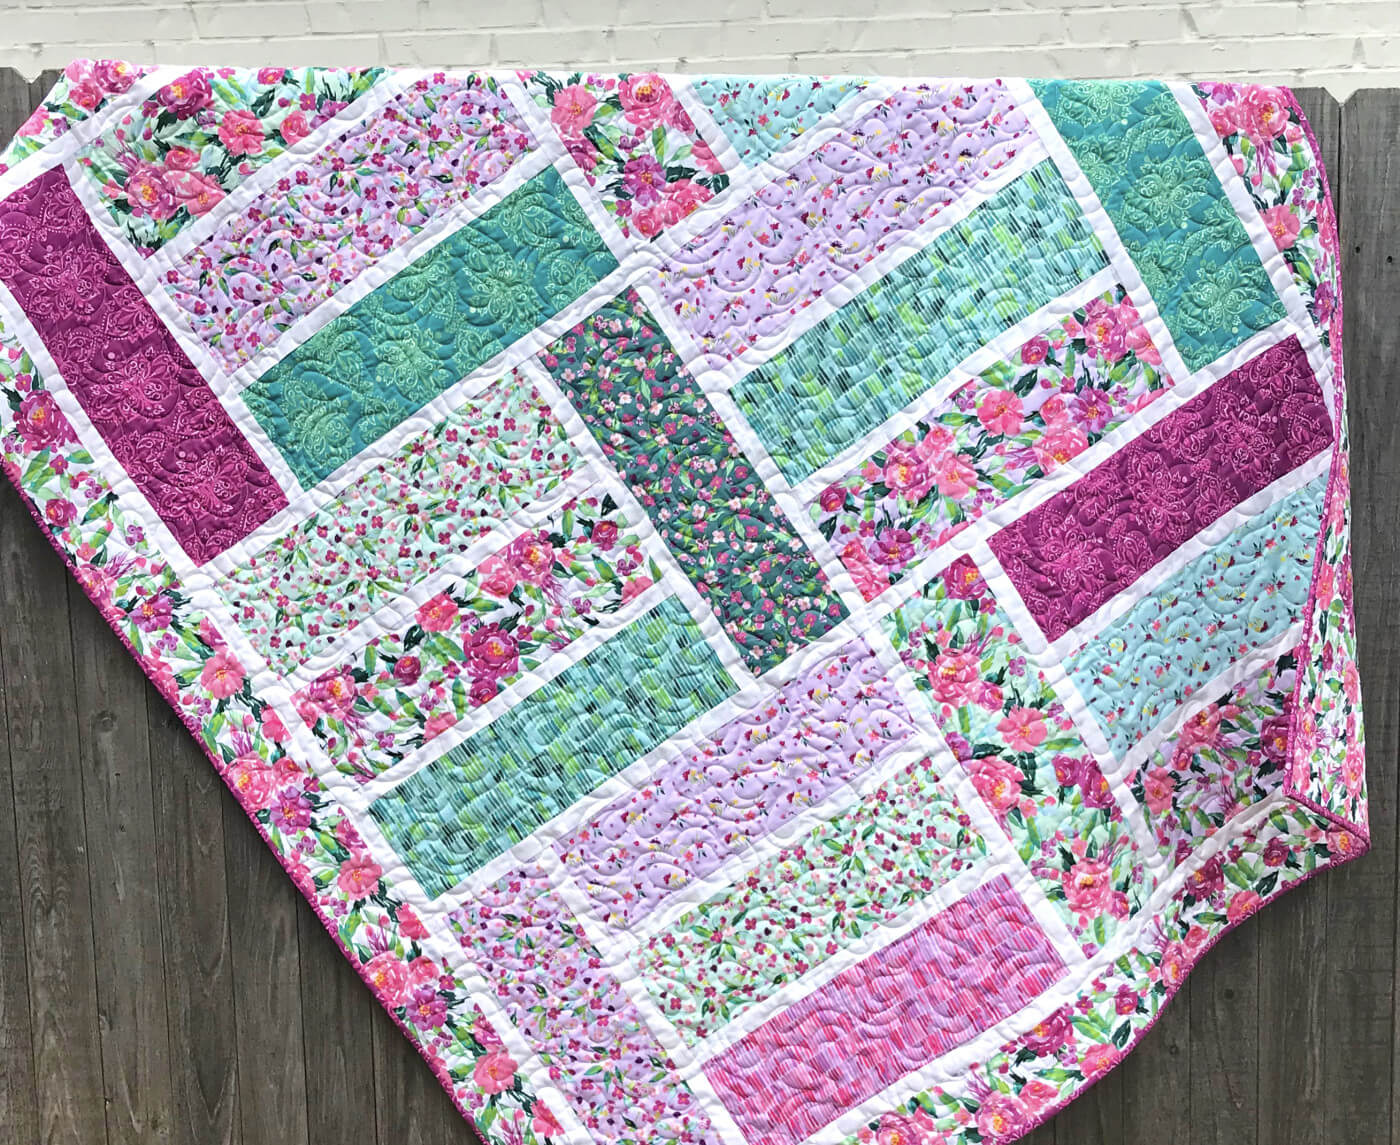 The Big Easy quilt pattern